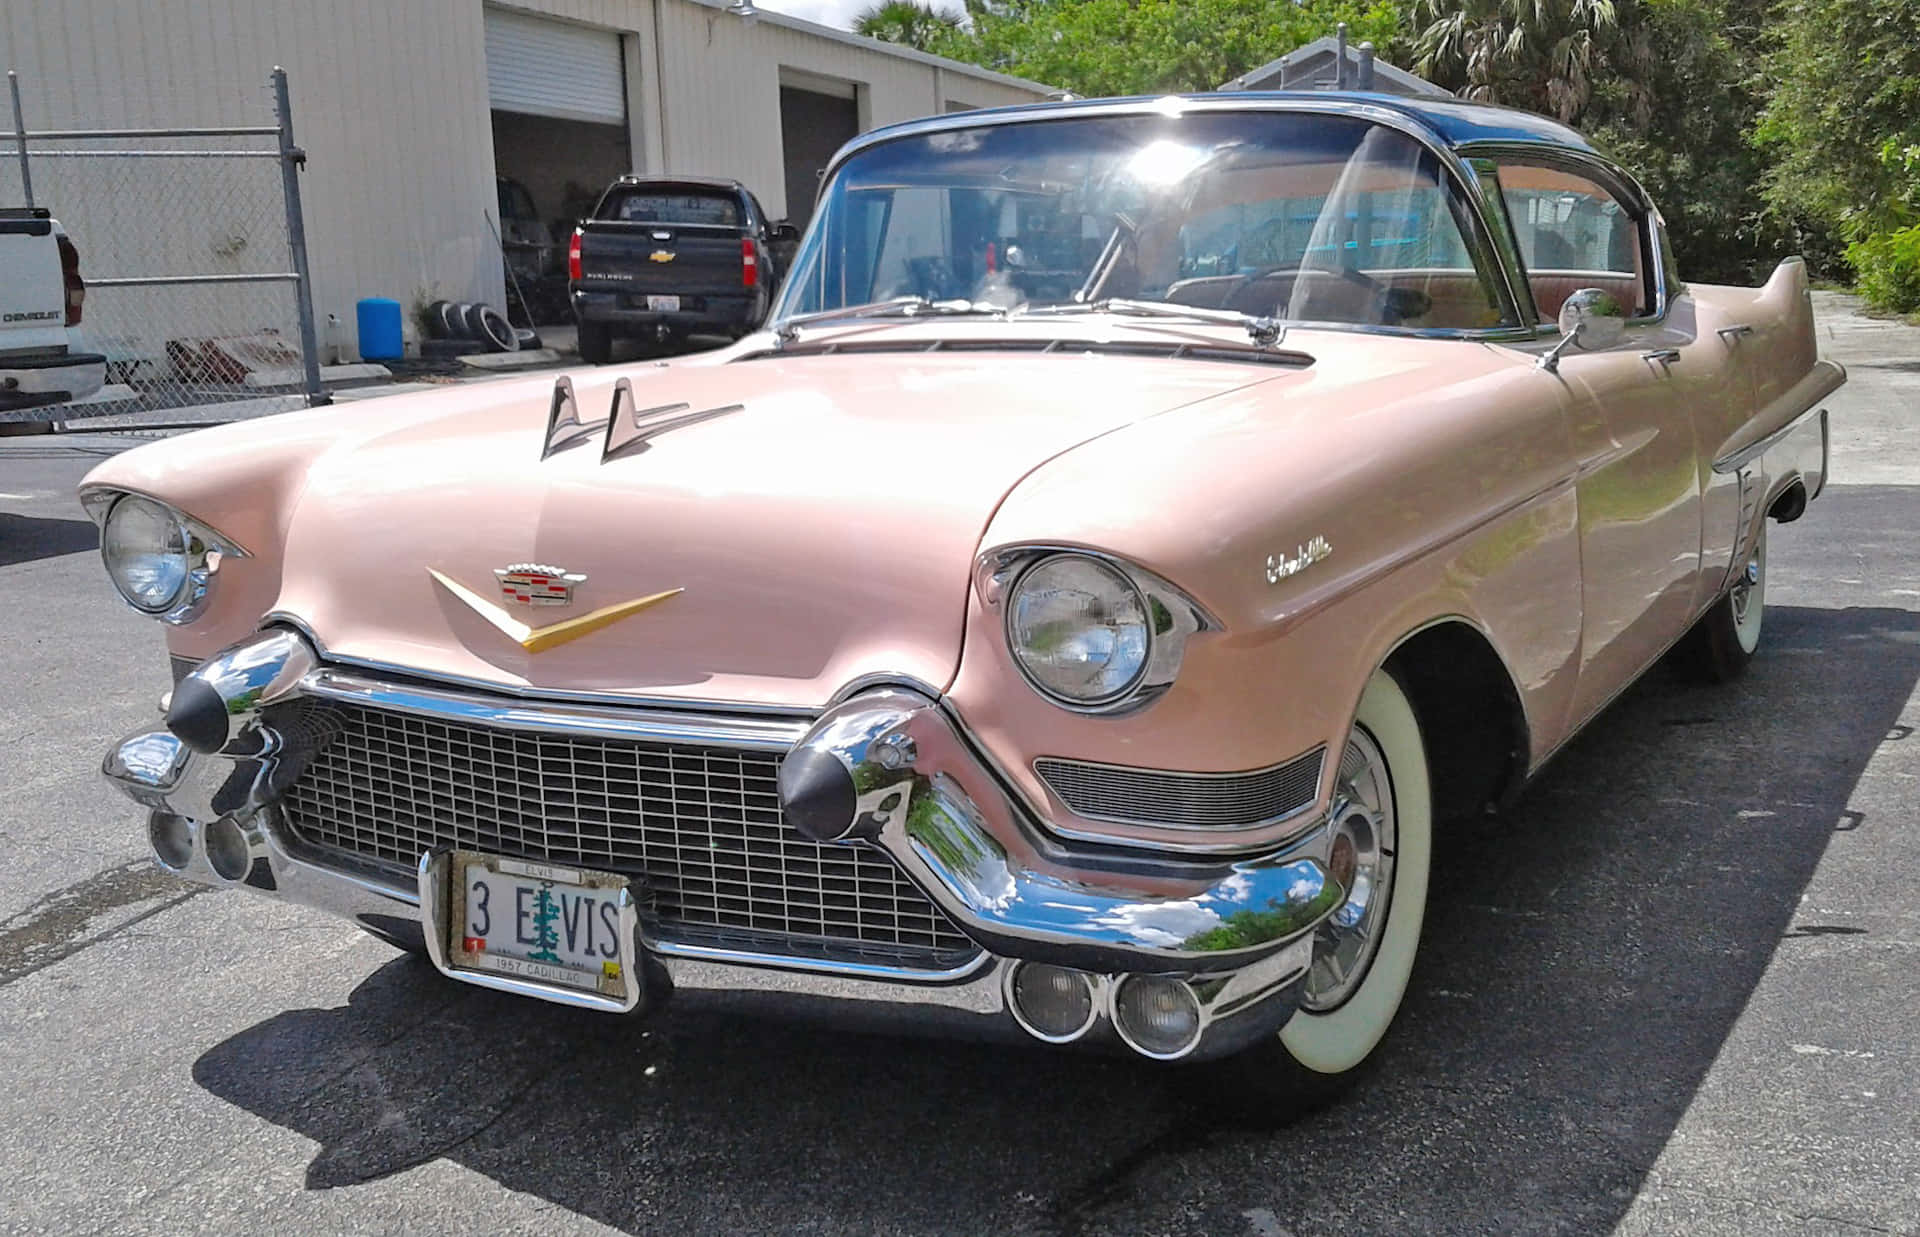 Vintage Pink Cadillac in Scenic Location Wallpaper